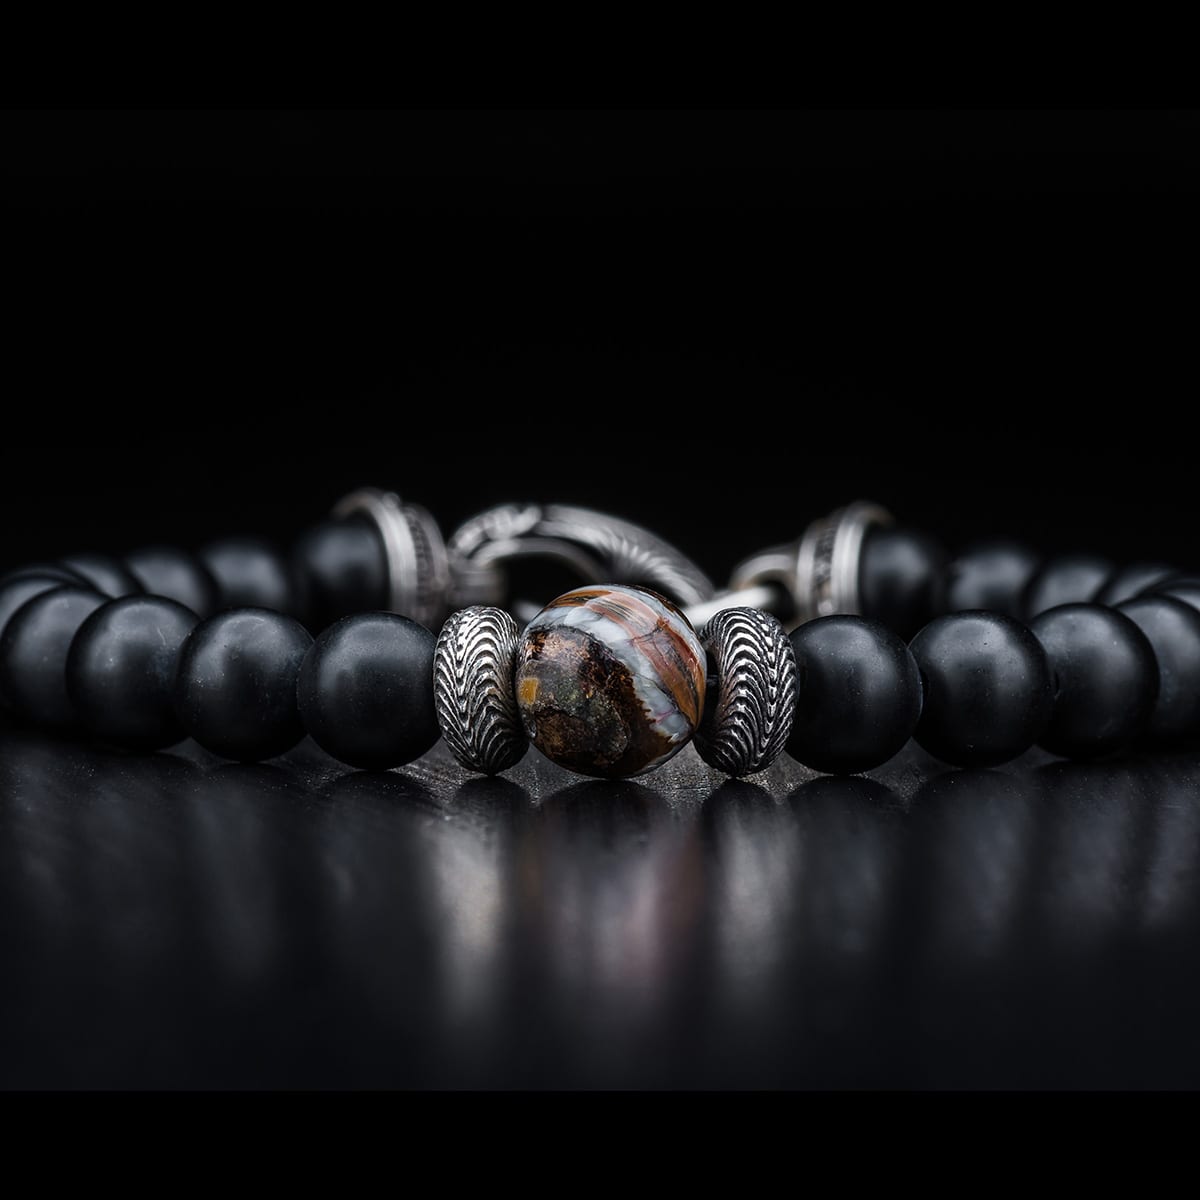 Men's Woolly Mammoth Tooth and Onyx Bracelet by William Henry Studio